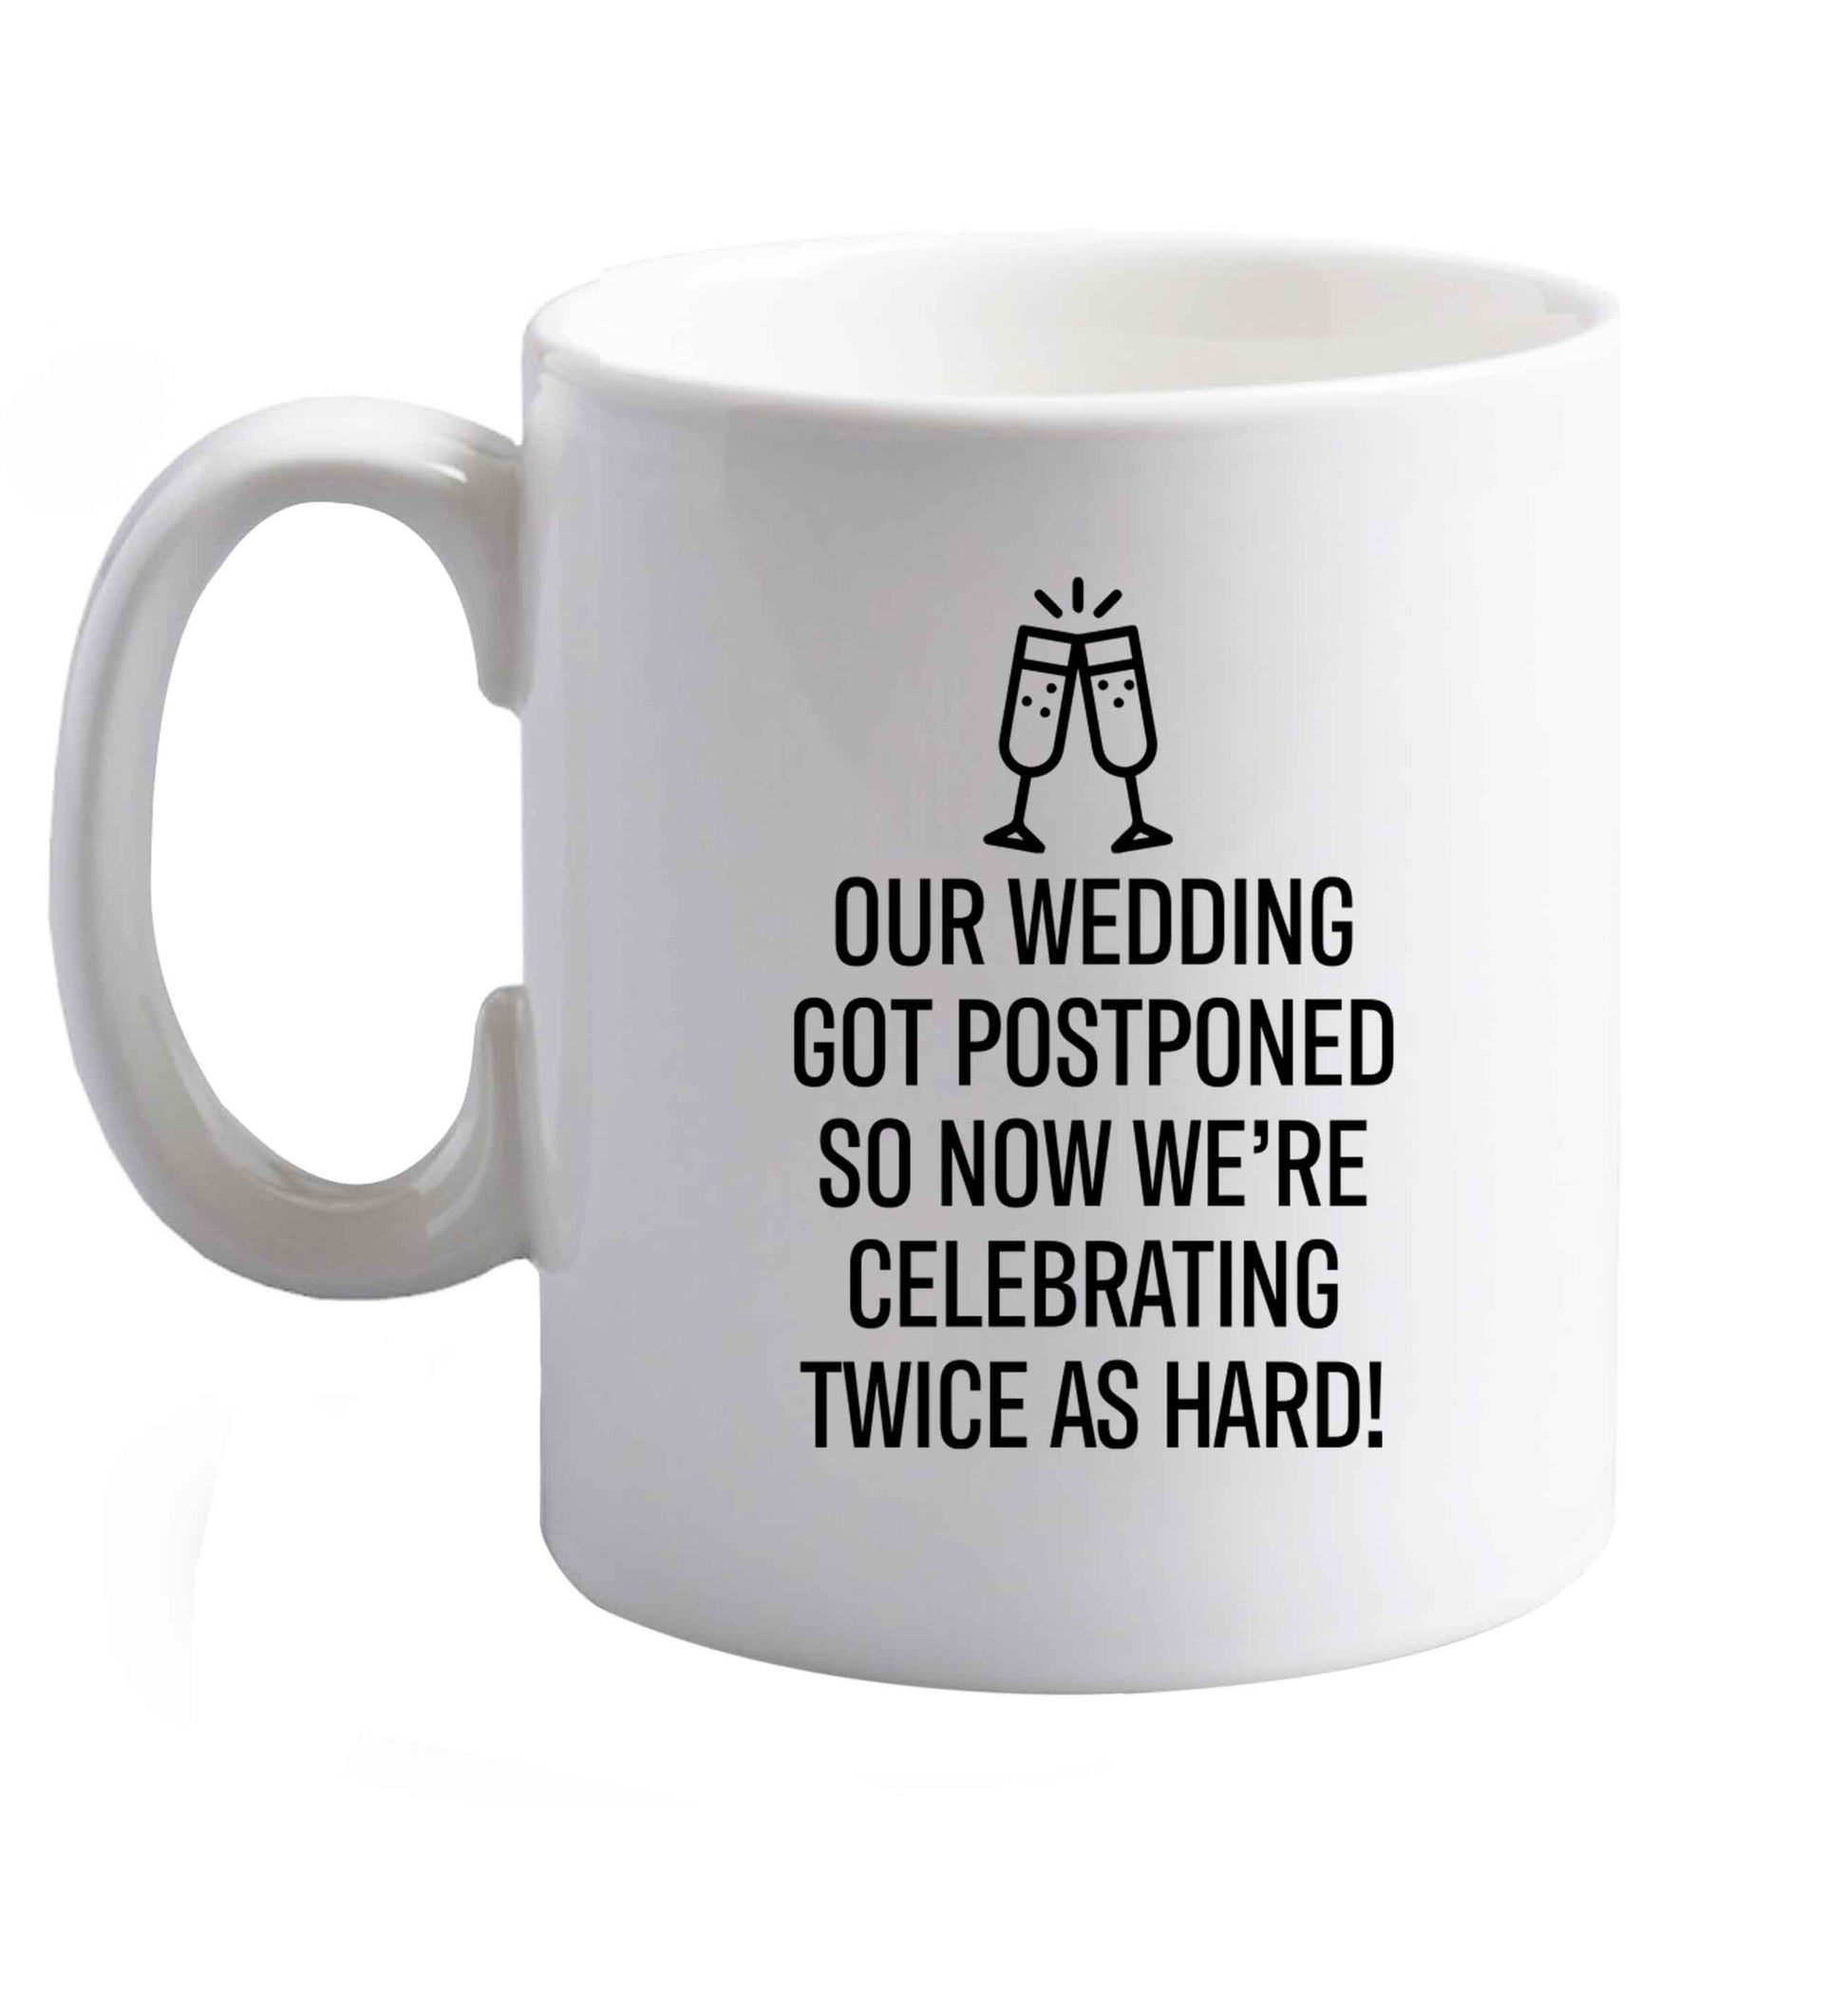 10 oz Postponed wedding? Sounds like an excuse to party twice as hard!    ceramic mug right handed